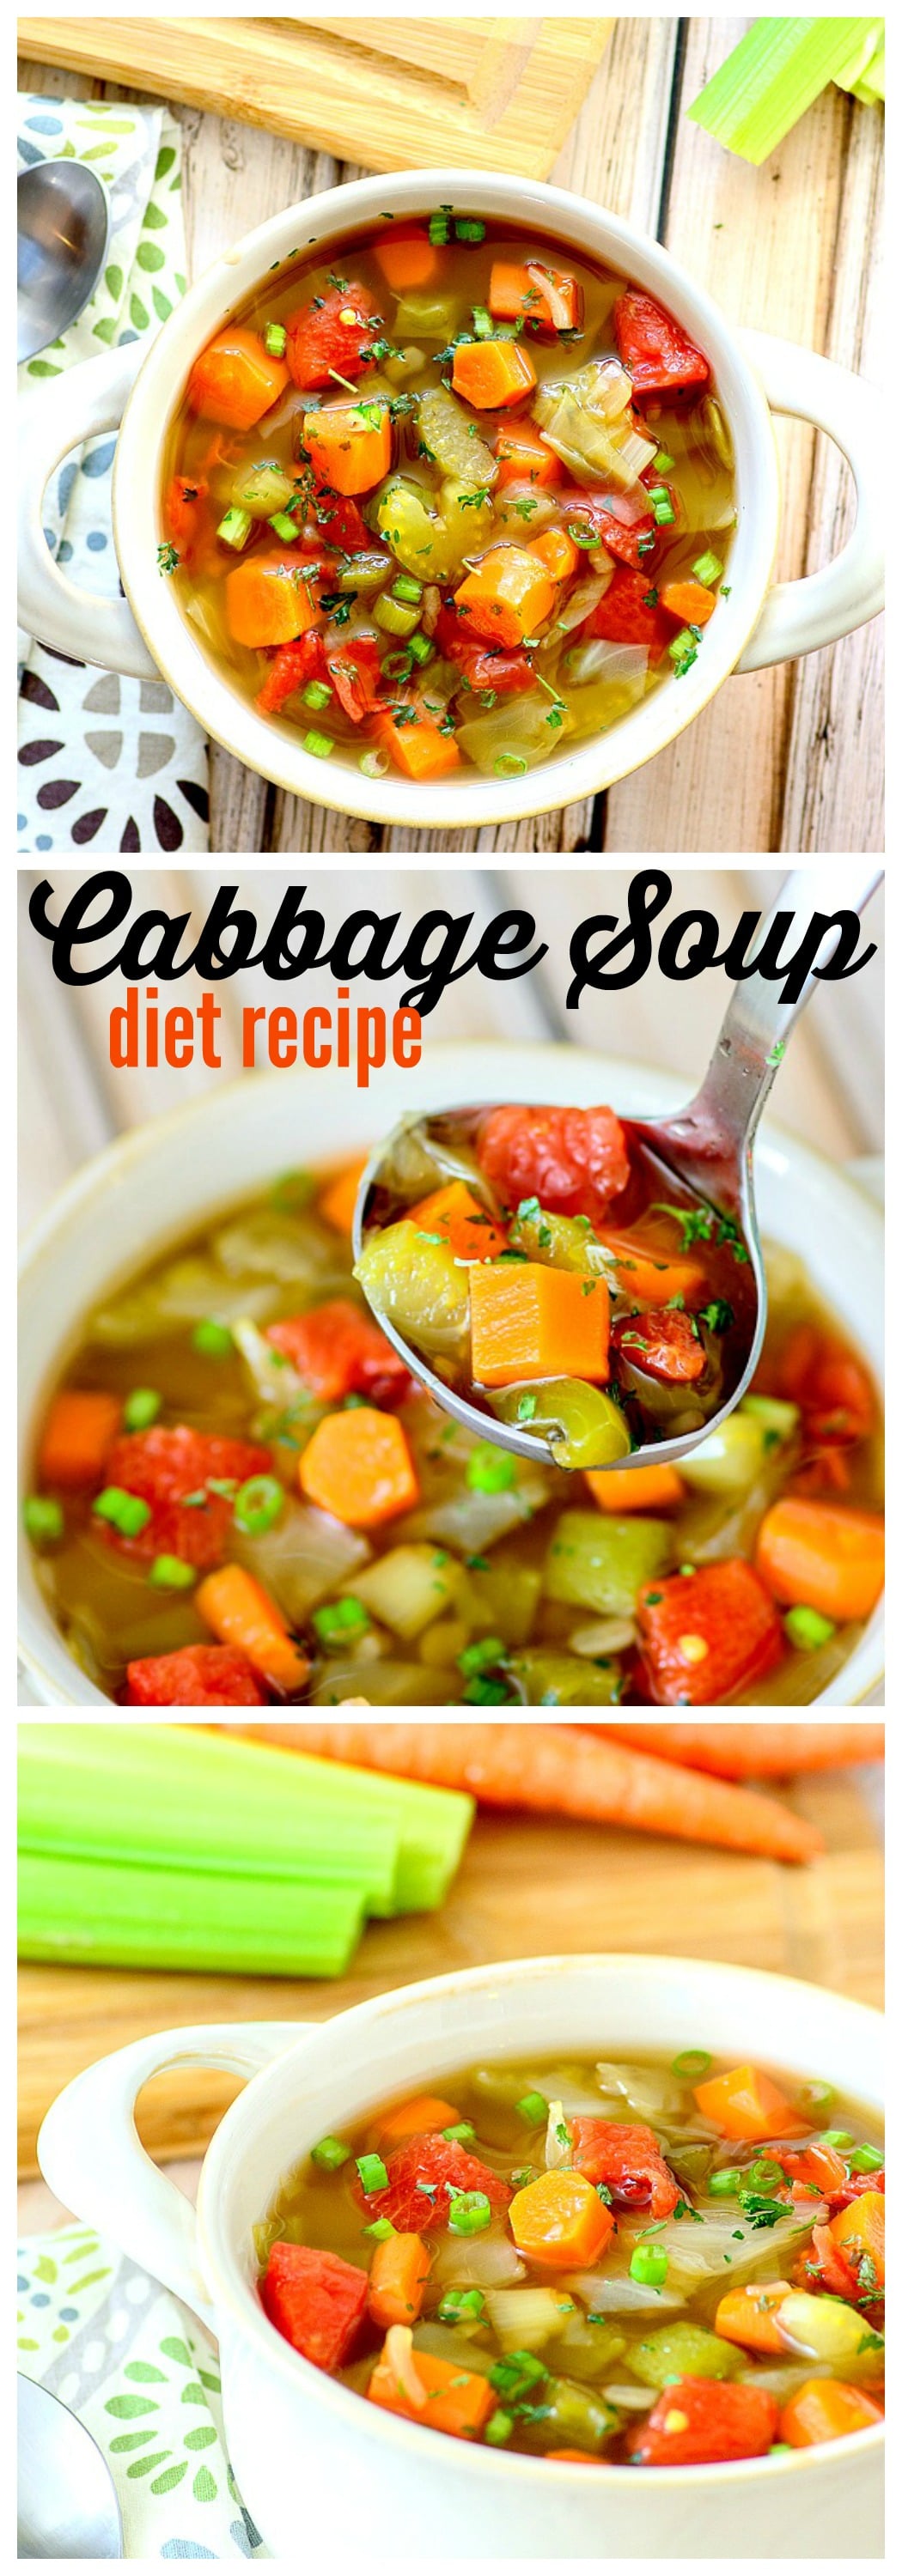 The Cabbage Soup Diet (Dolly Parton Diet); Does it really work?